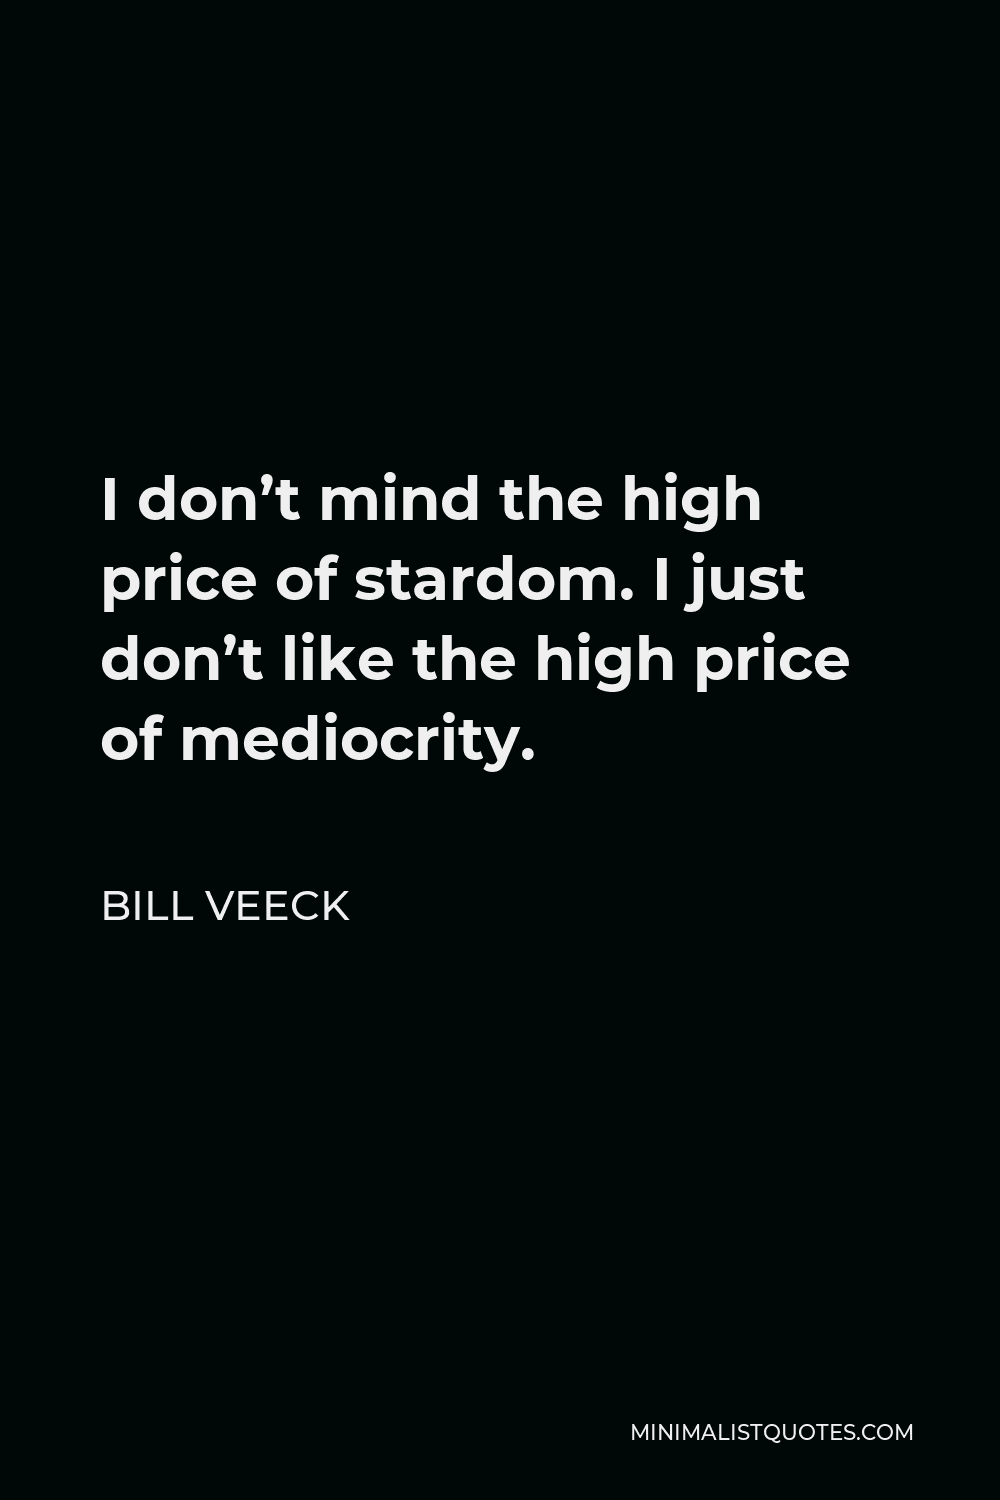 Bill Veeck Quote - I don’t mind the high price of stardom. I just don’t like the high price of mediocrity.